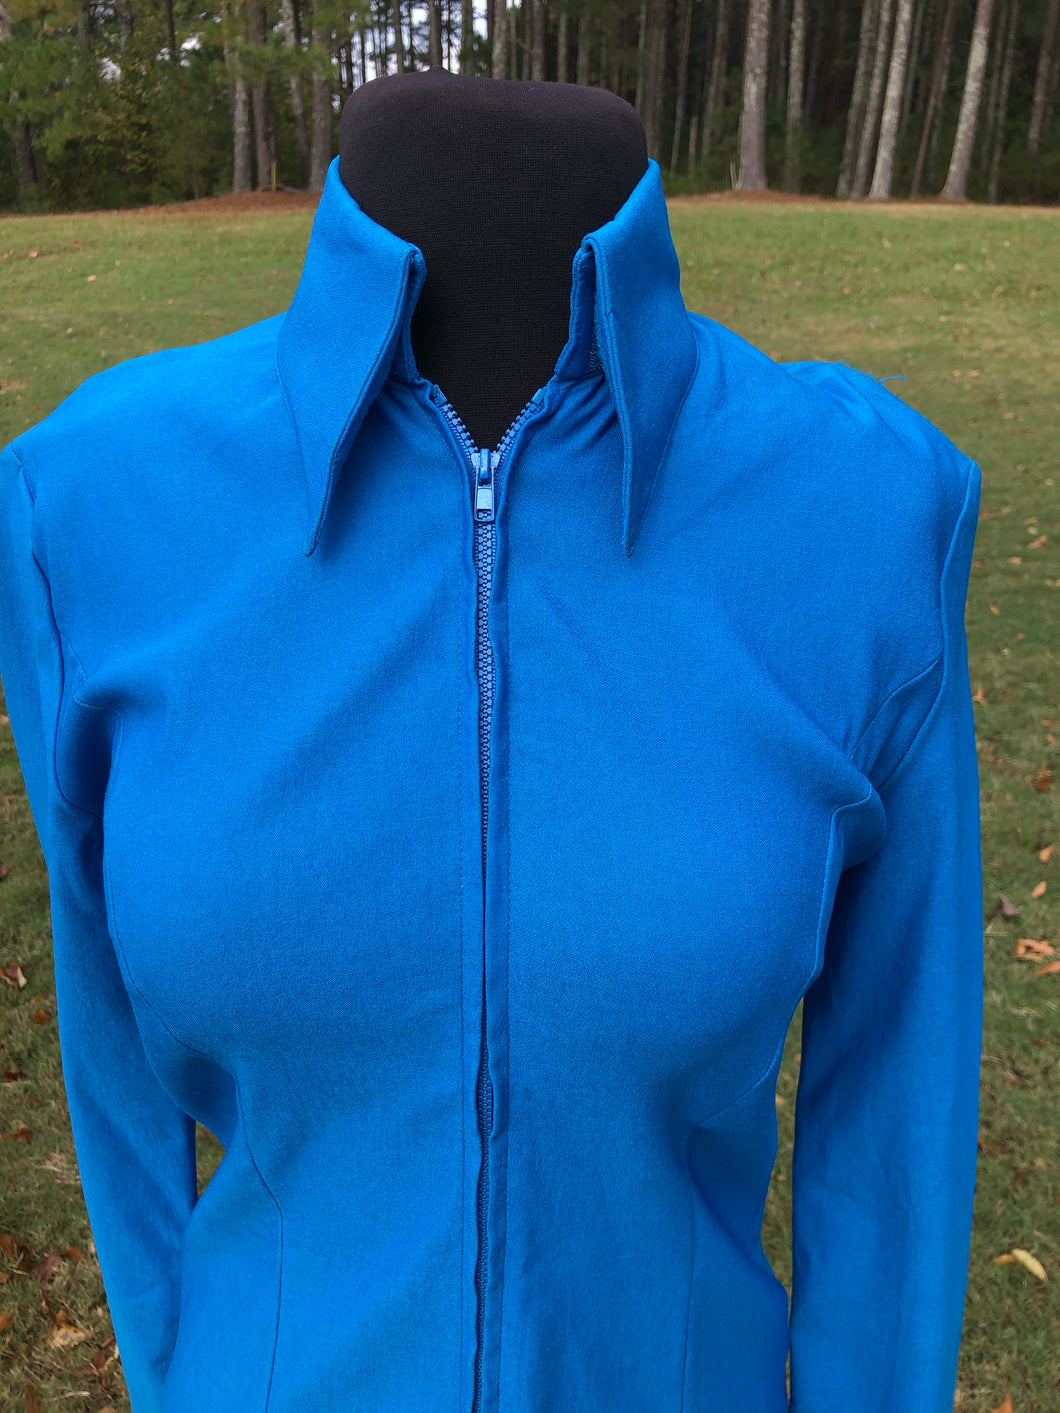 Teal Stretch Zip Up